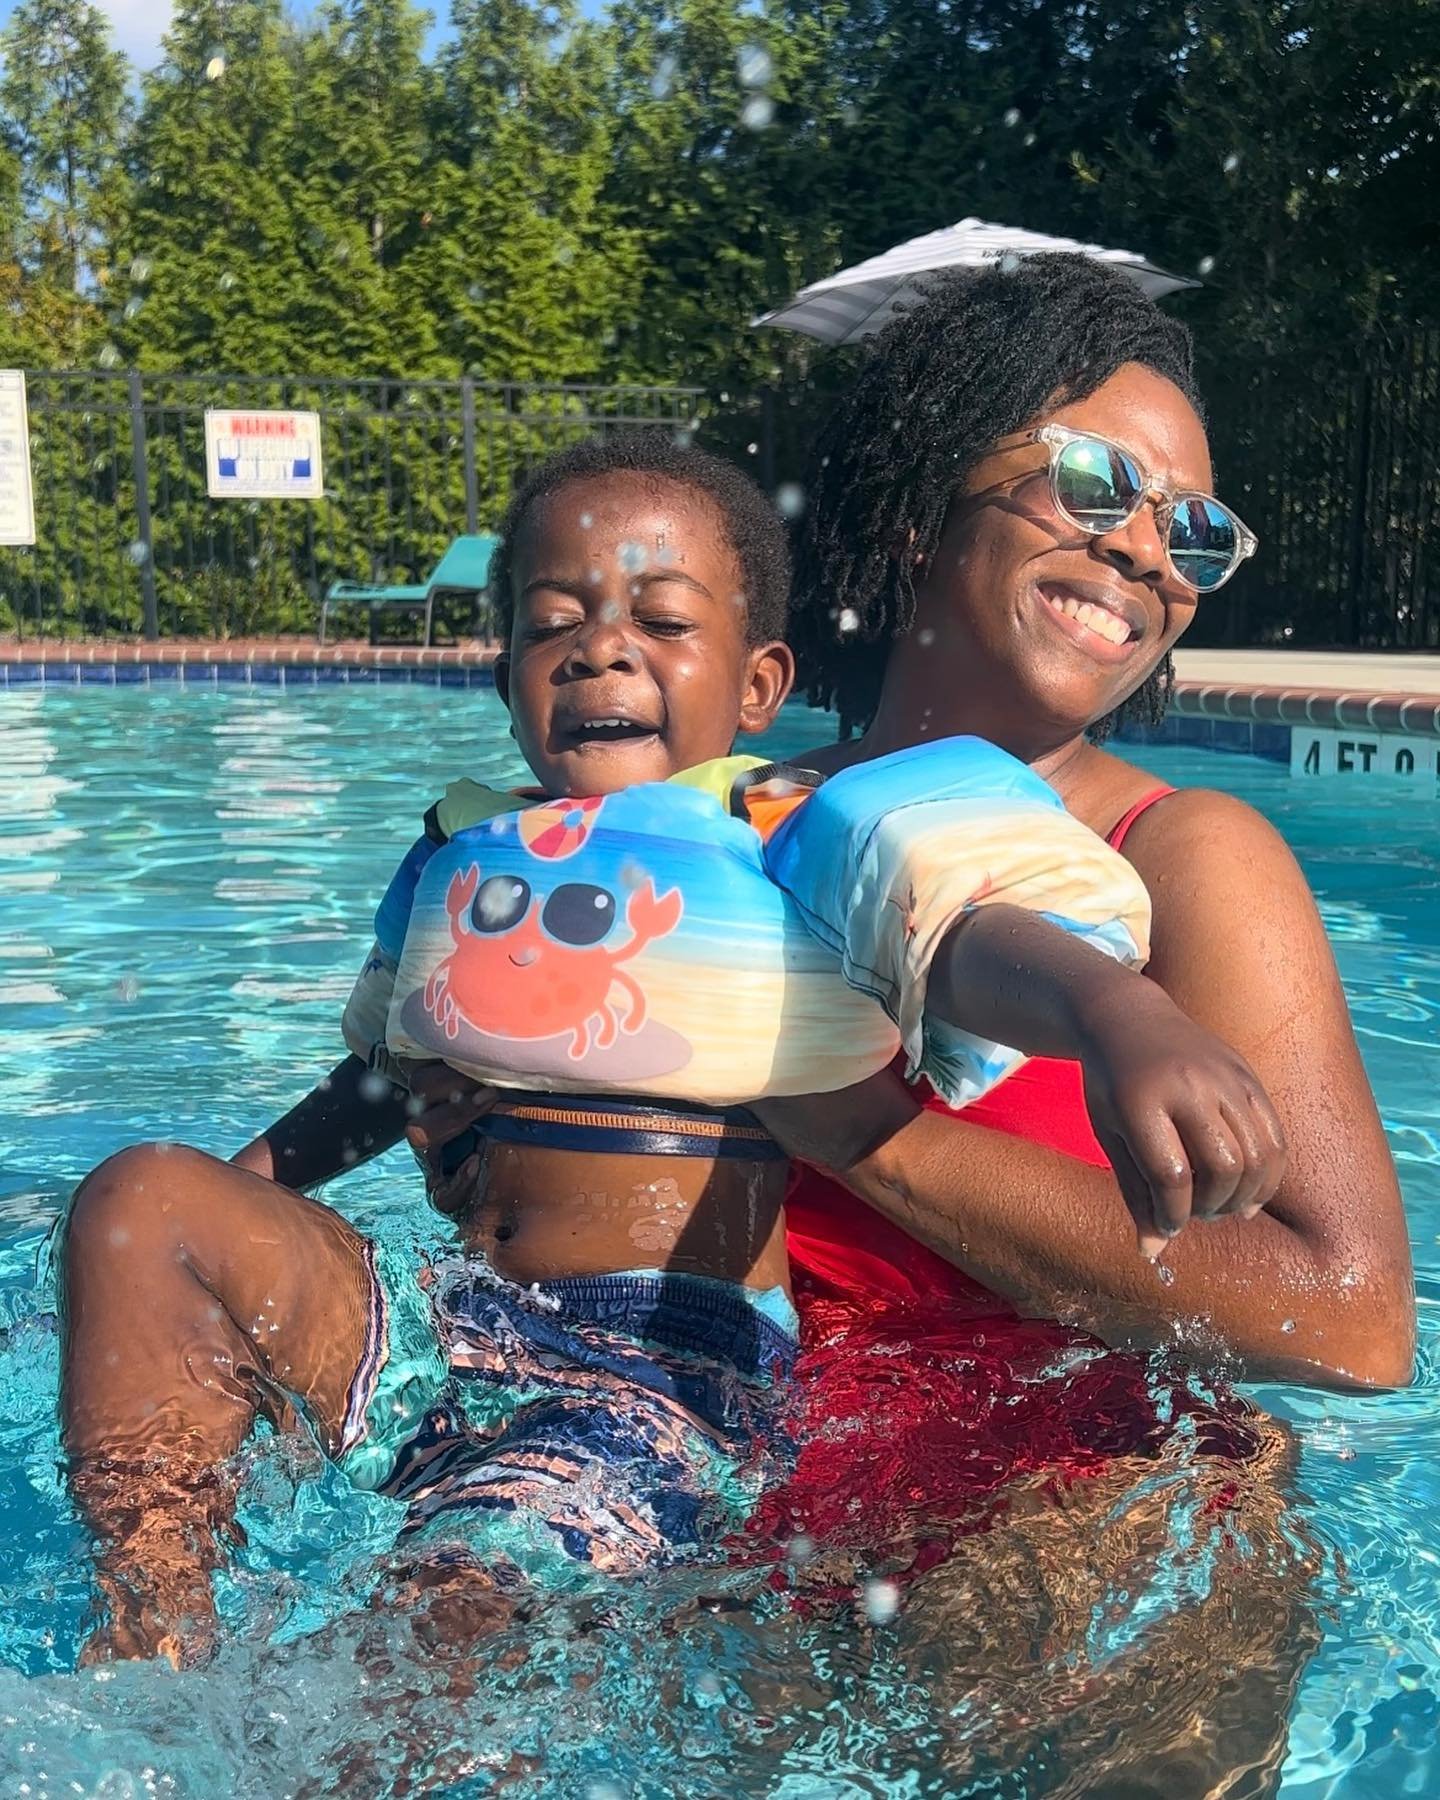 There&rsquo;s never a dull moment when I&rsquo;m with this little guy. Happy Son&rsquo;s Day to my sweet boy! 

#sonsday #sonshine #nationalsonsday #meetmarquita #motherandson #blackboyjoy #realmotherhood #mommystwin